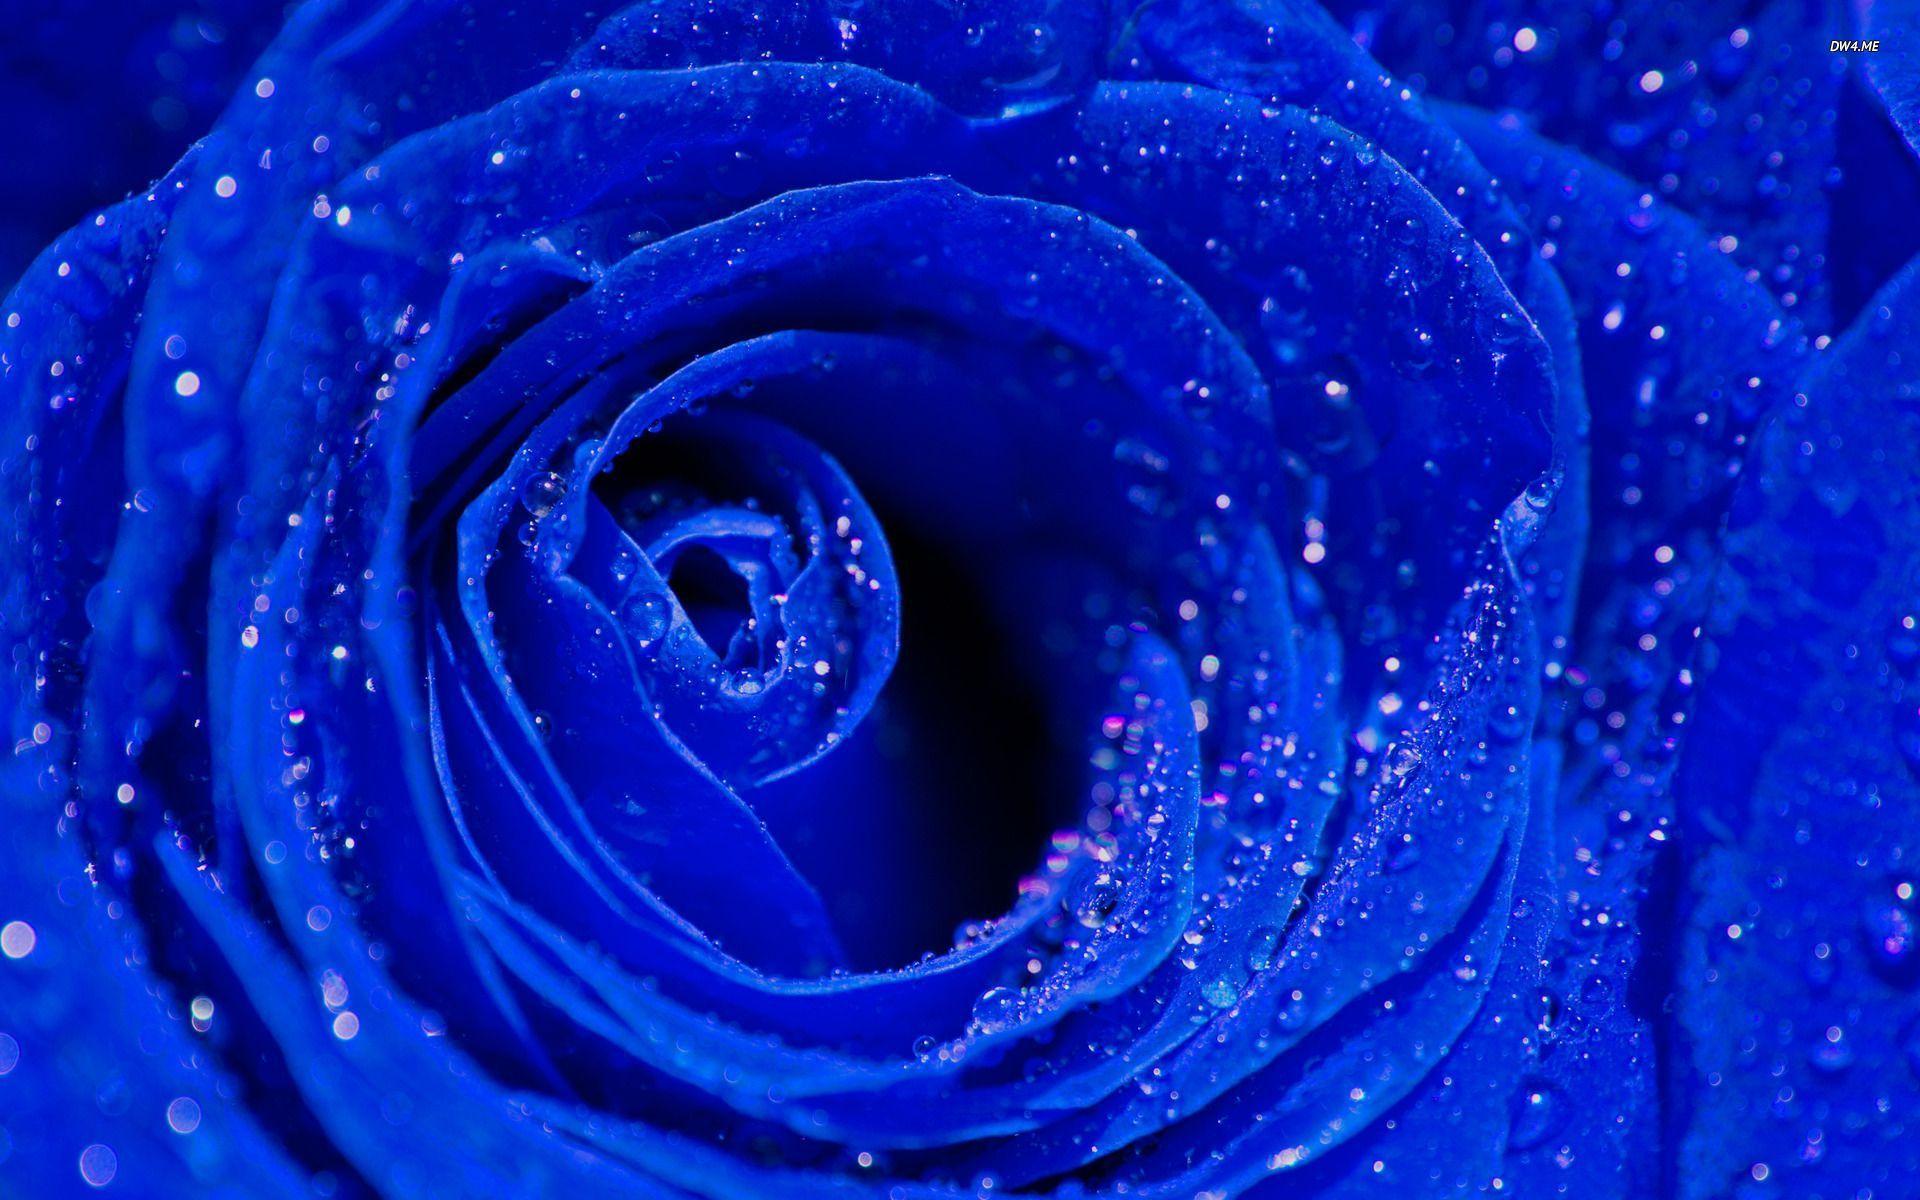 Blue Rose Background Wallpaper Image & Picture